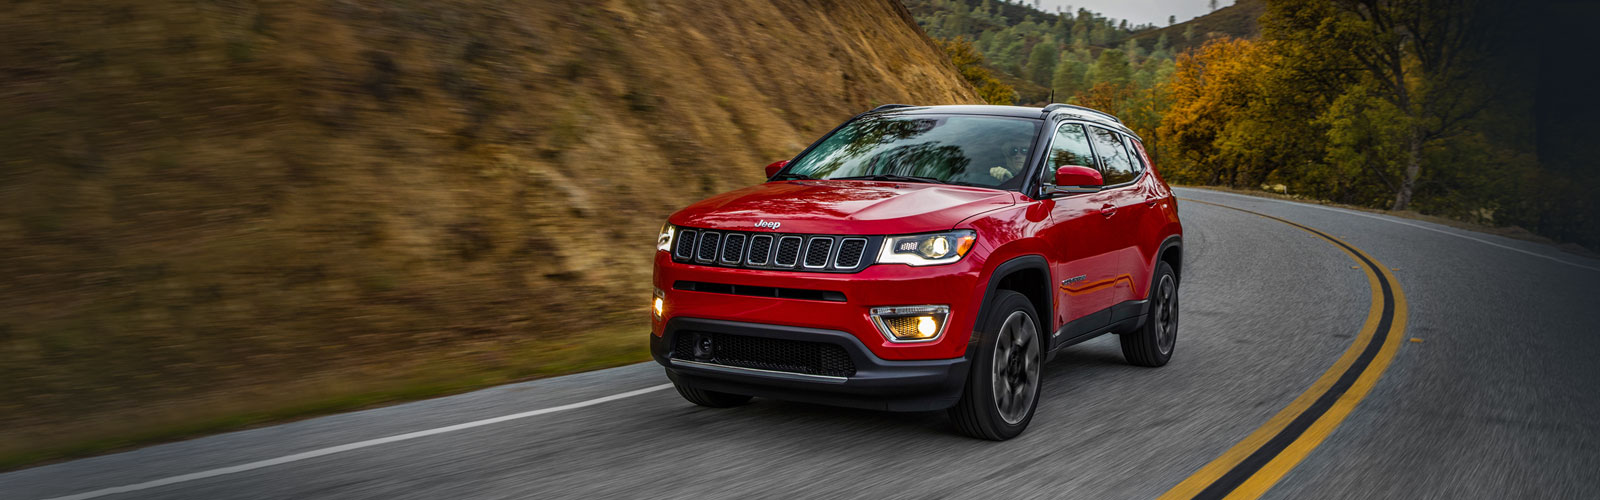 Jeep Compass On Road Price in Bangalore - PPS Jeep